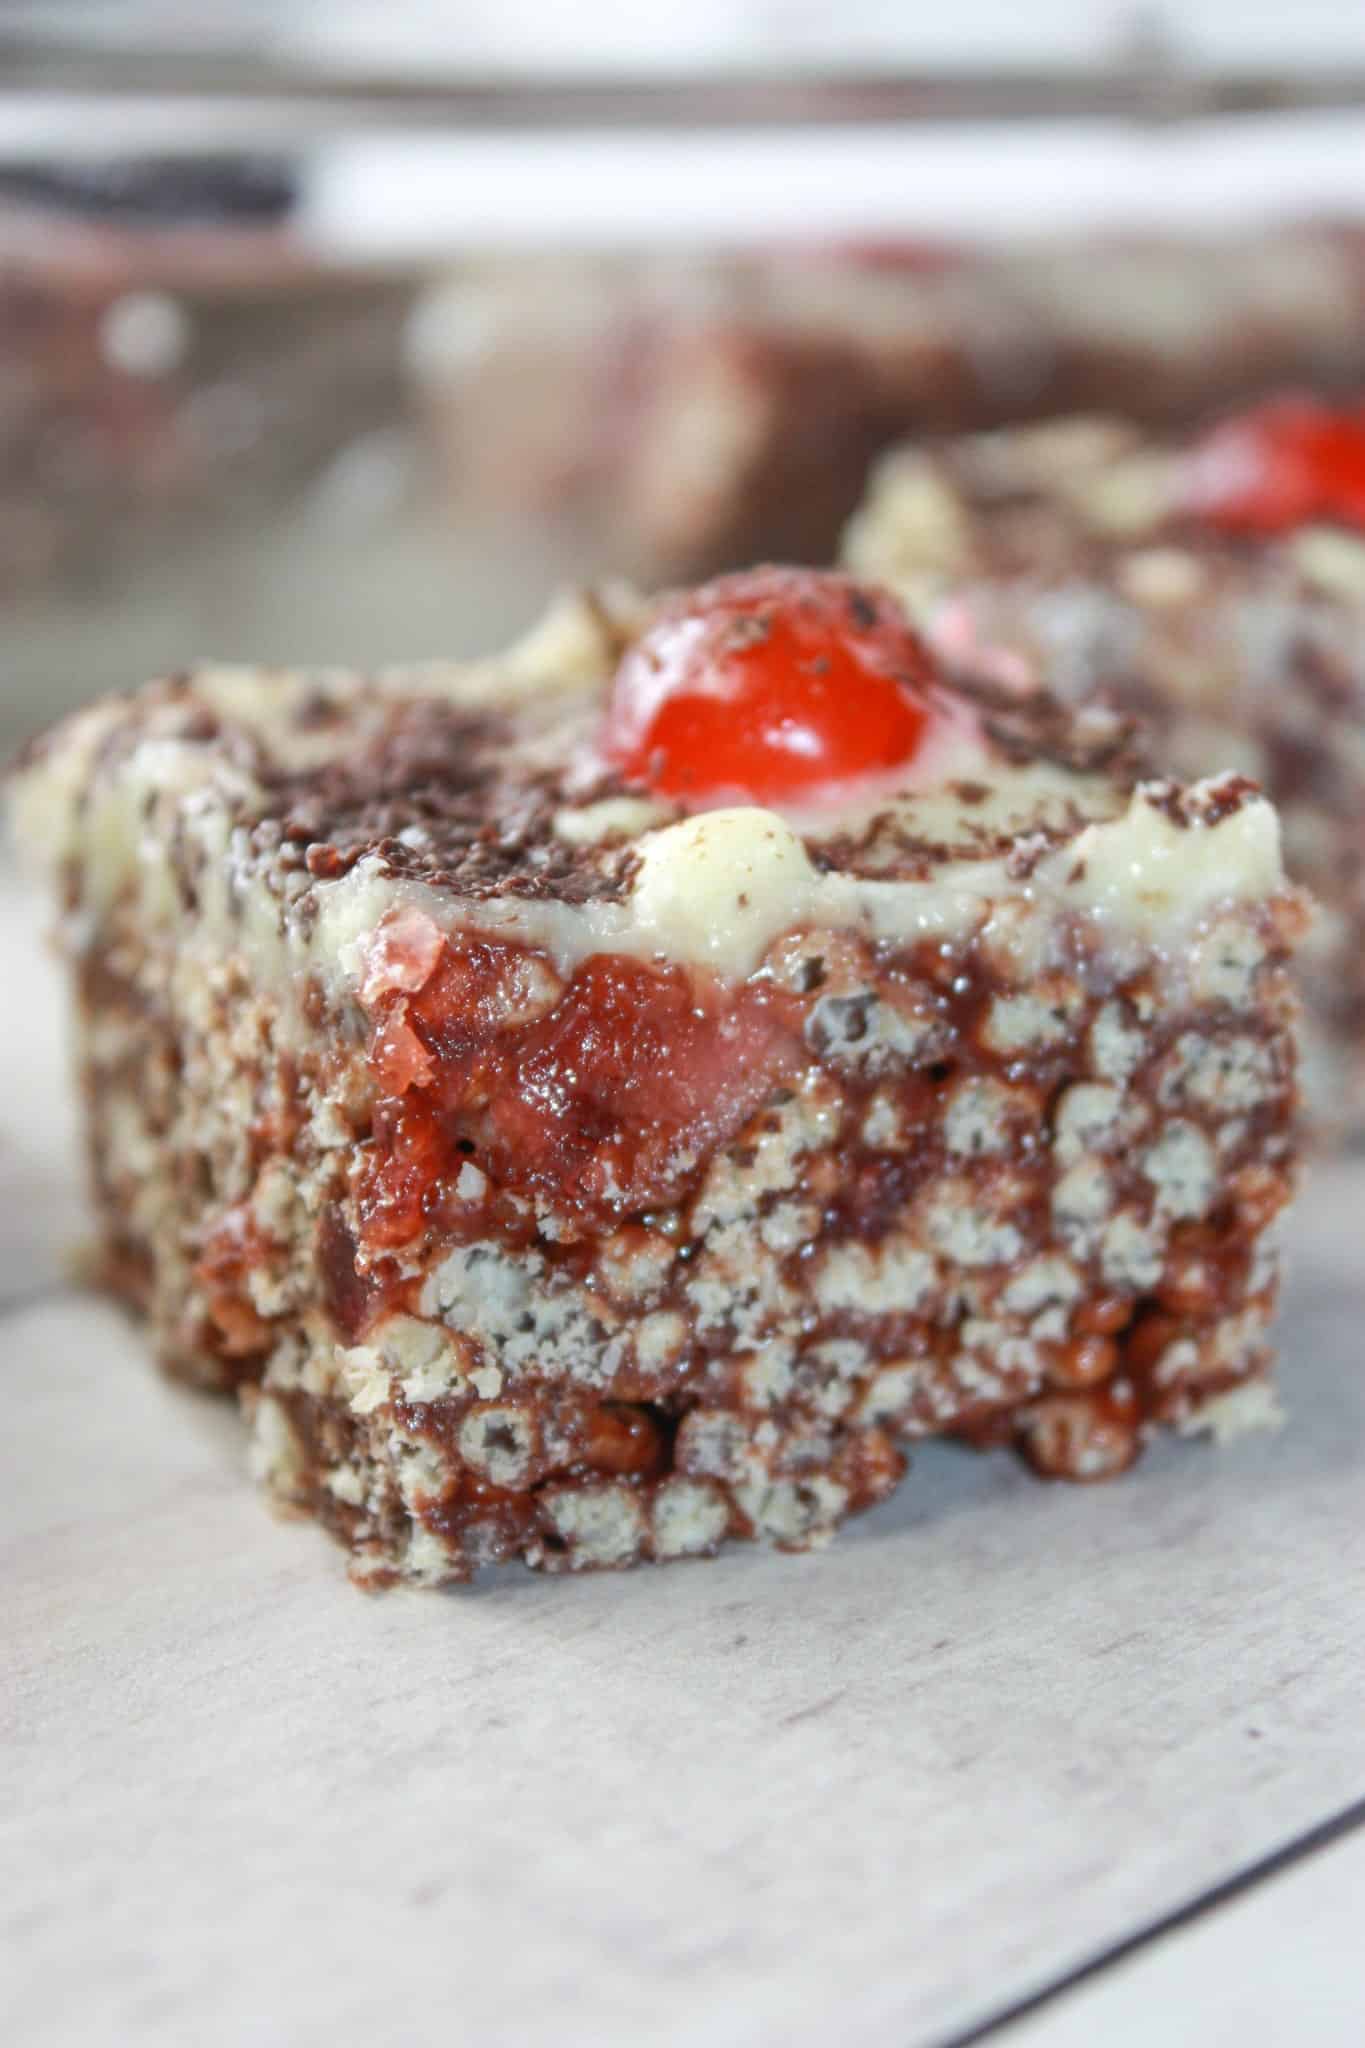 Black Forest Crispy Rice Squares are an easy no bake dessert recipe.  This dressed up version of Rice Krispie Squares is loaded with chocolate and cherries that make it pleasing to the eye as well as the taste buds.